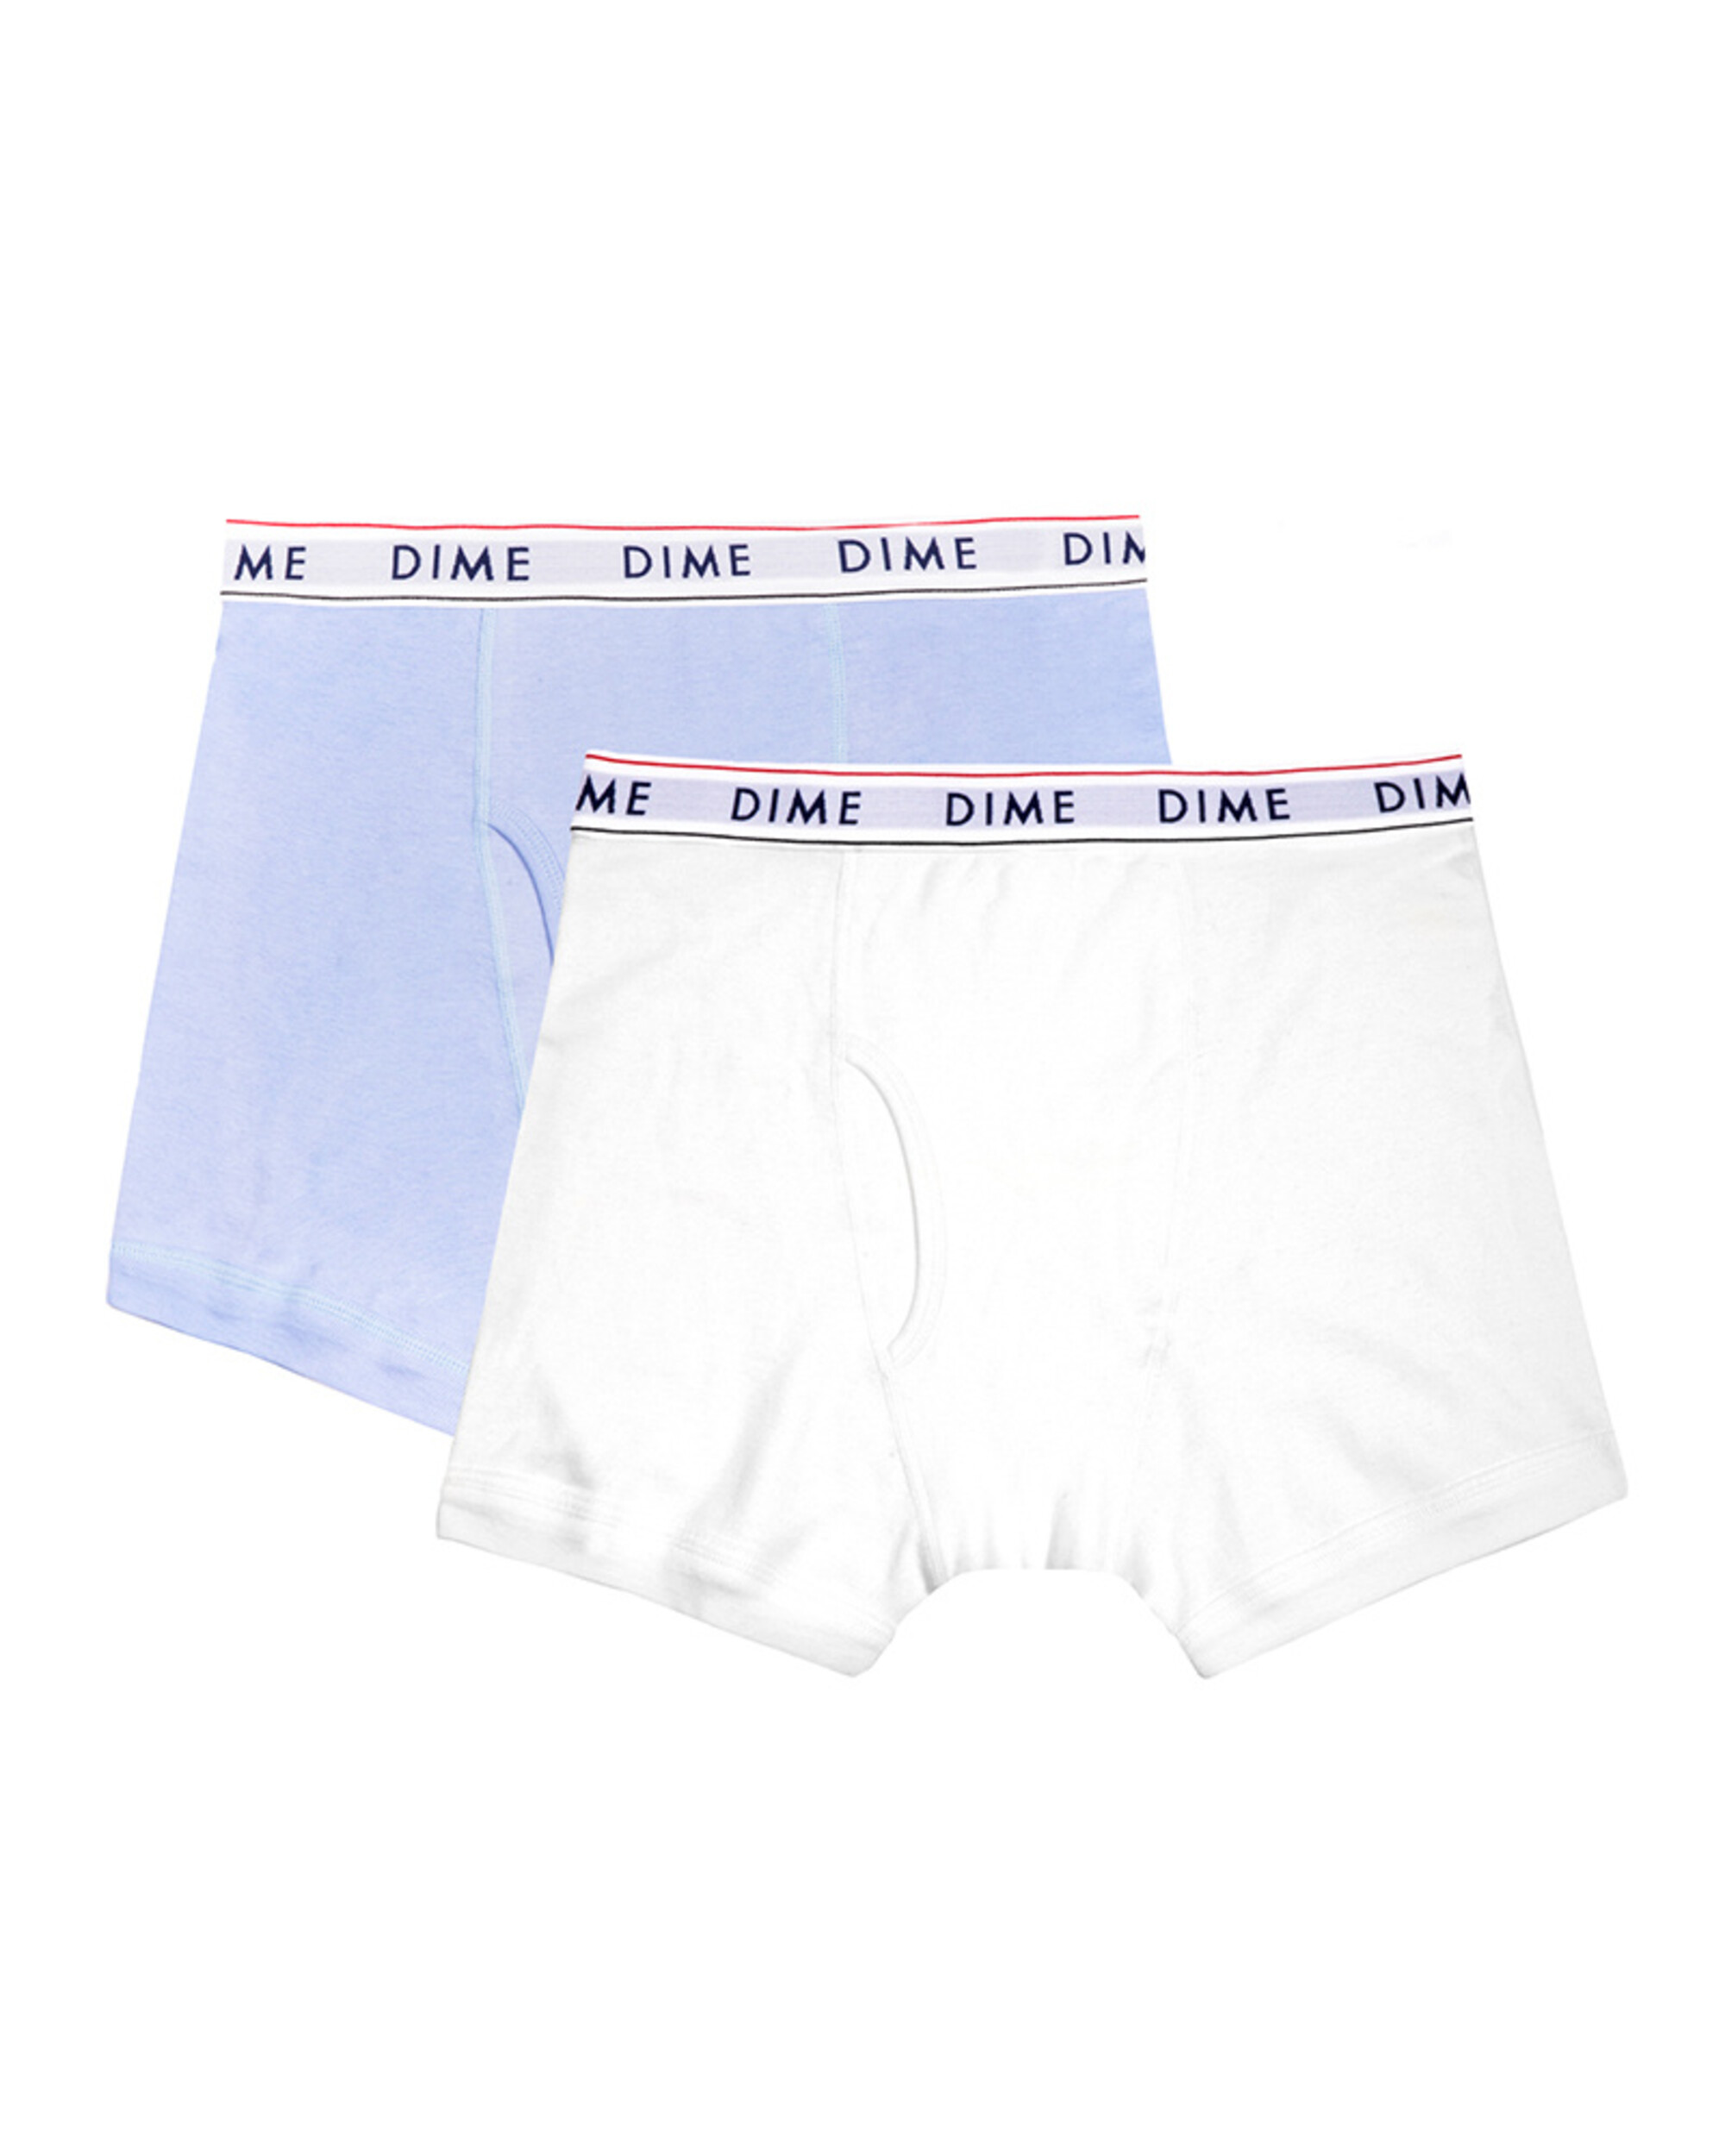 Dime Boxers Two Pack Light Blue/White